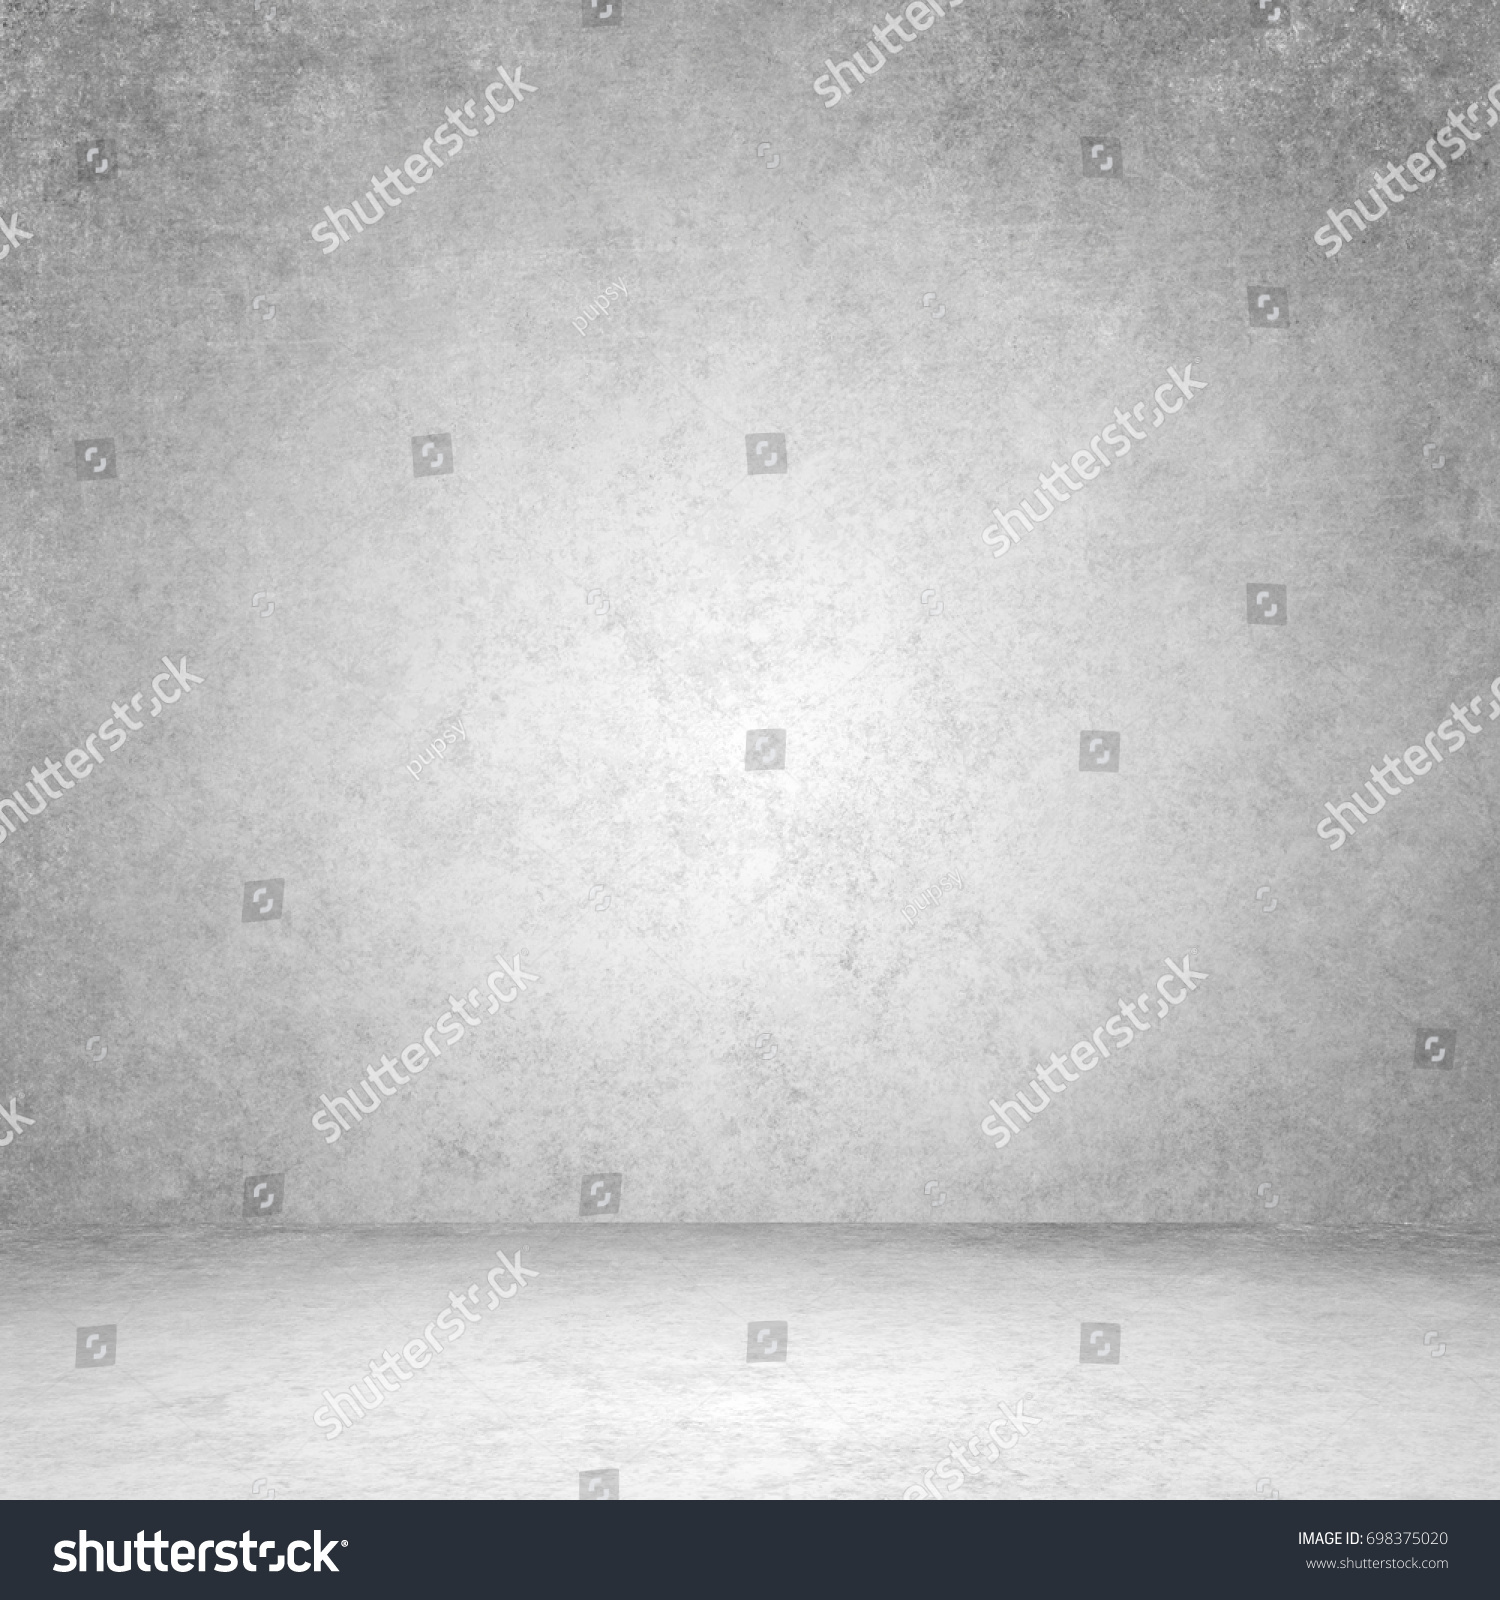 Designed grunge texture. Wall and floor interior background #698375020